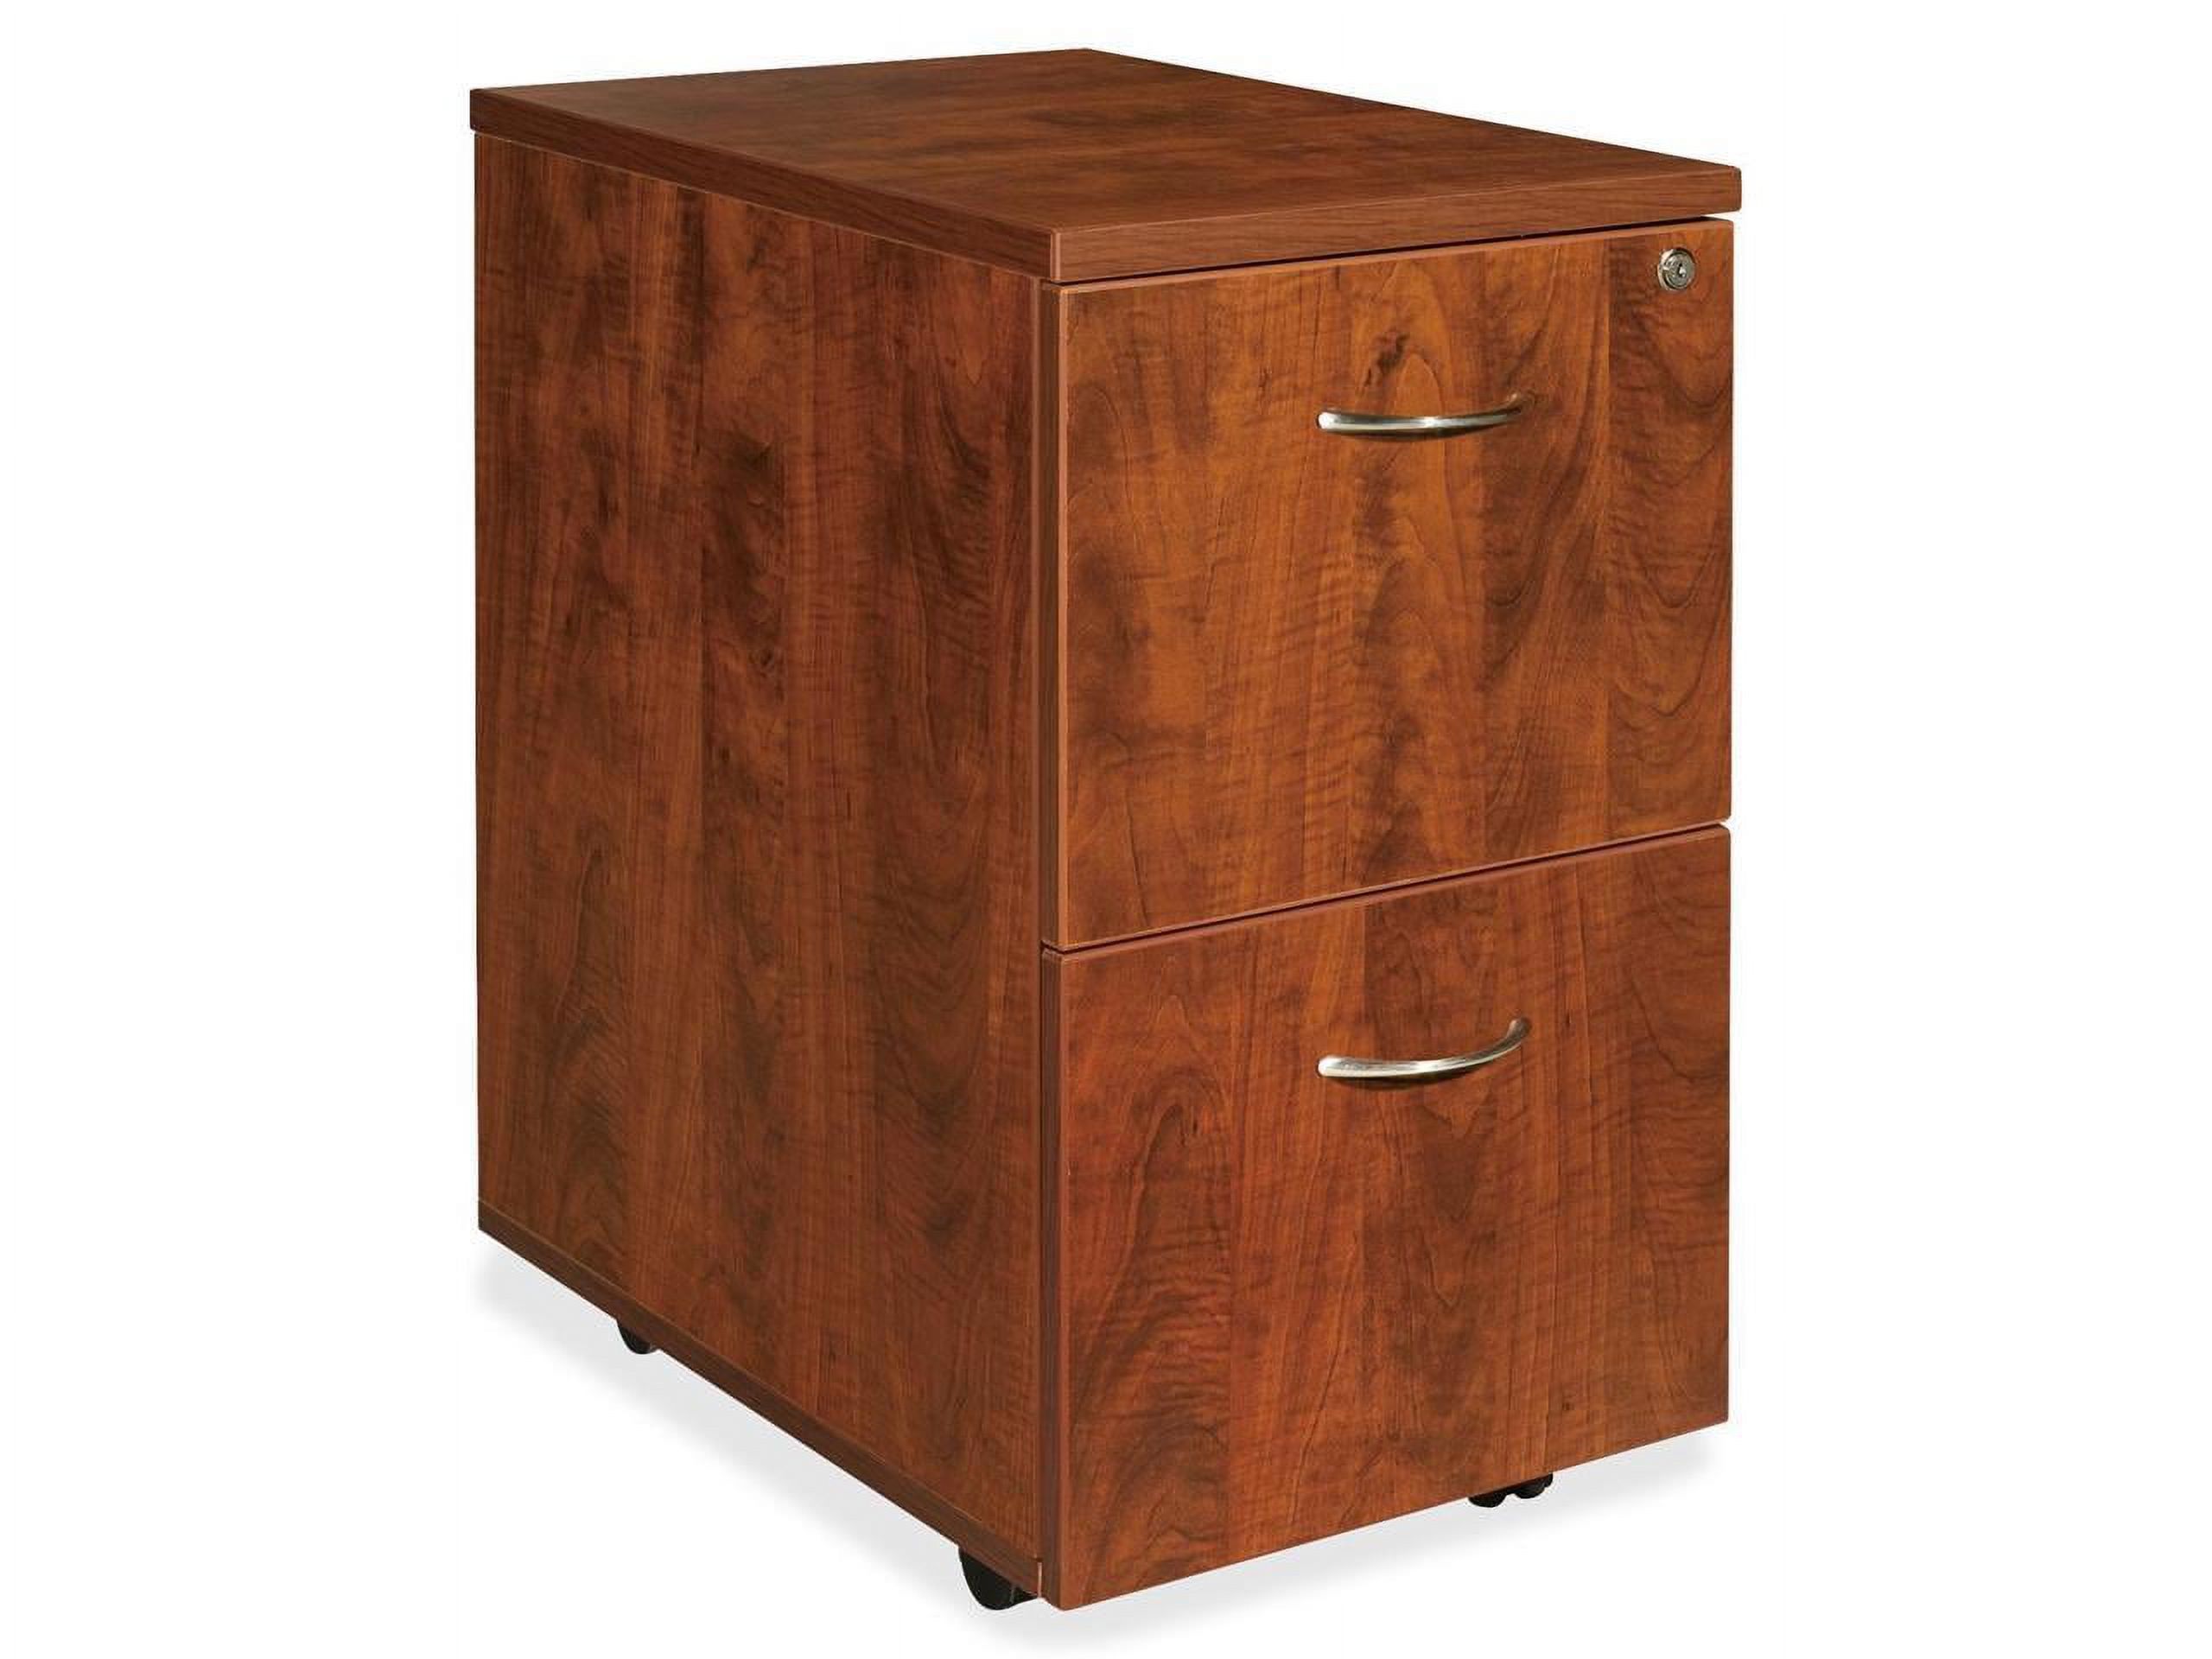 2 Drawers Vertical Wood Composite Lockable Filing Cabinet, Cherry, Letter-Size - image 3 of 14